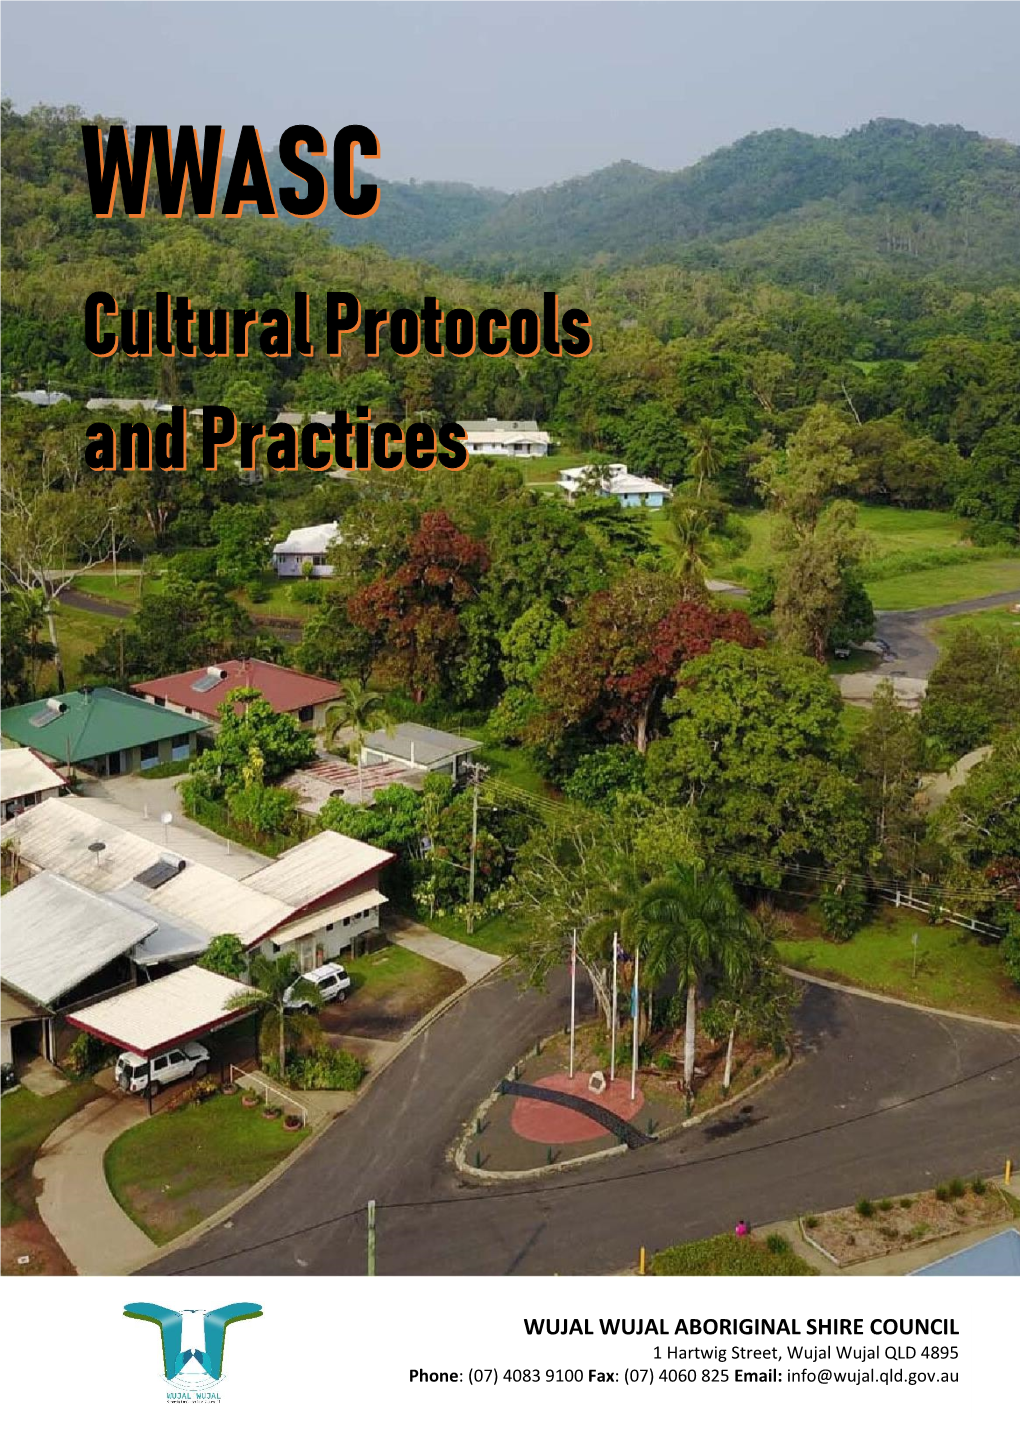 WWASC Cultural Protocols and Practices 2